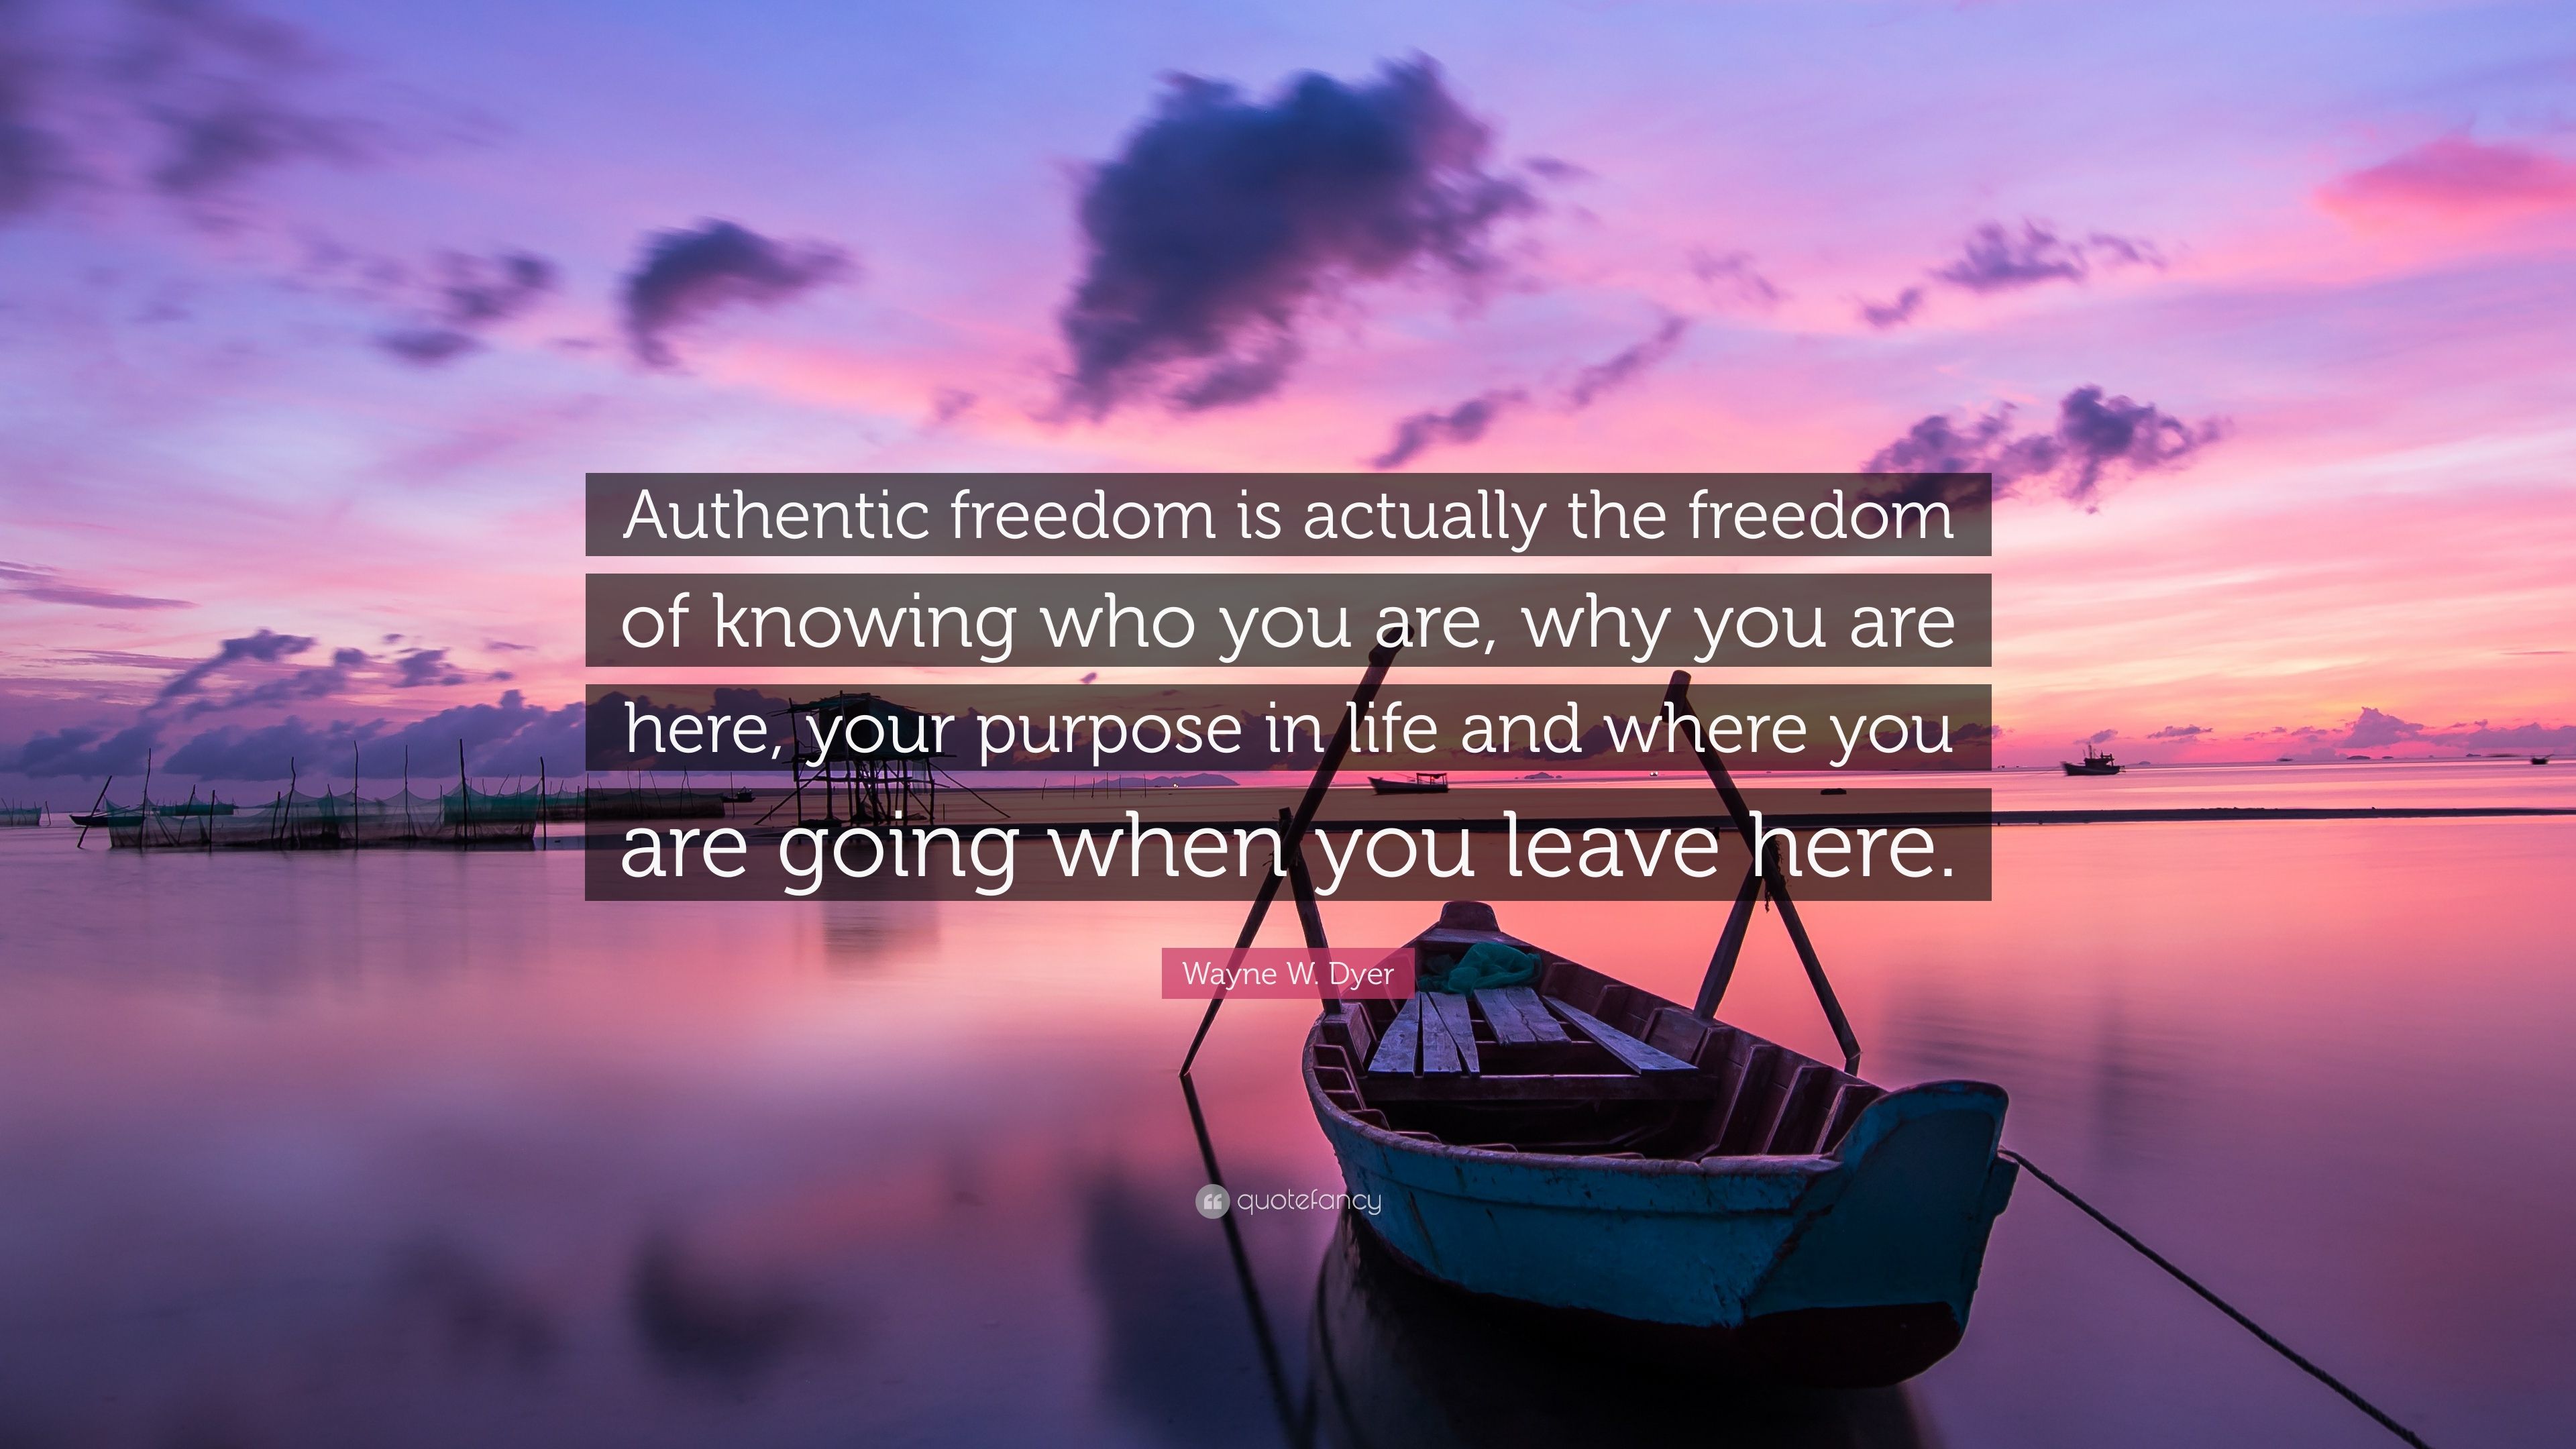 Wayne W. Dyer Quote: “Authentic freedom is actually the freedom of knowing who you are, why you are here, your purpose in life and where you a.” (12 wallpaper)